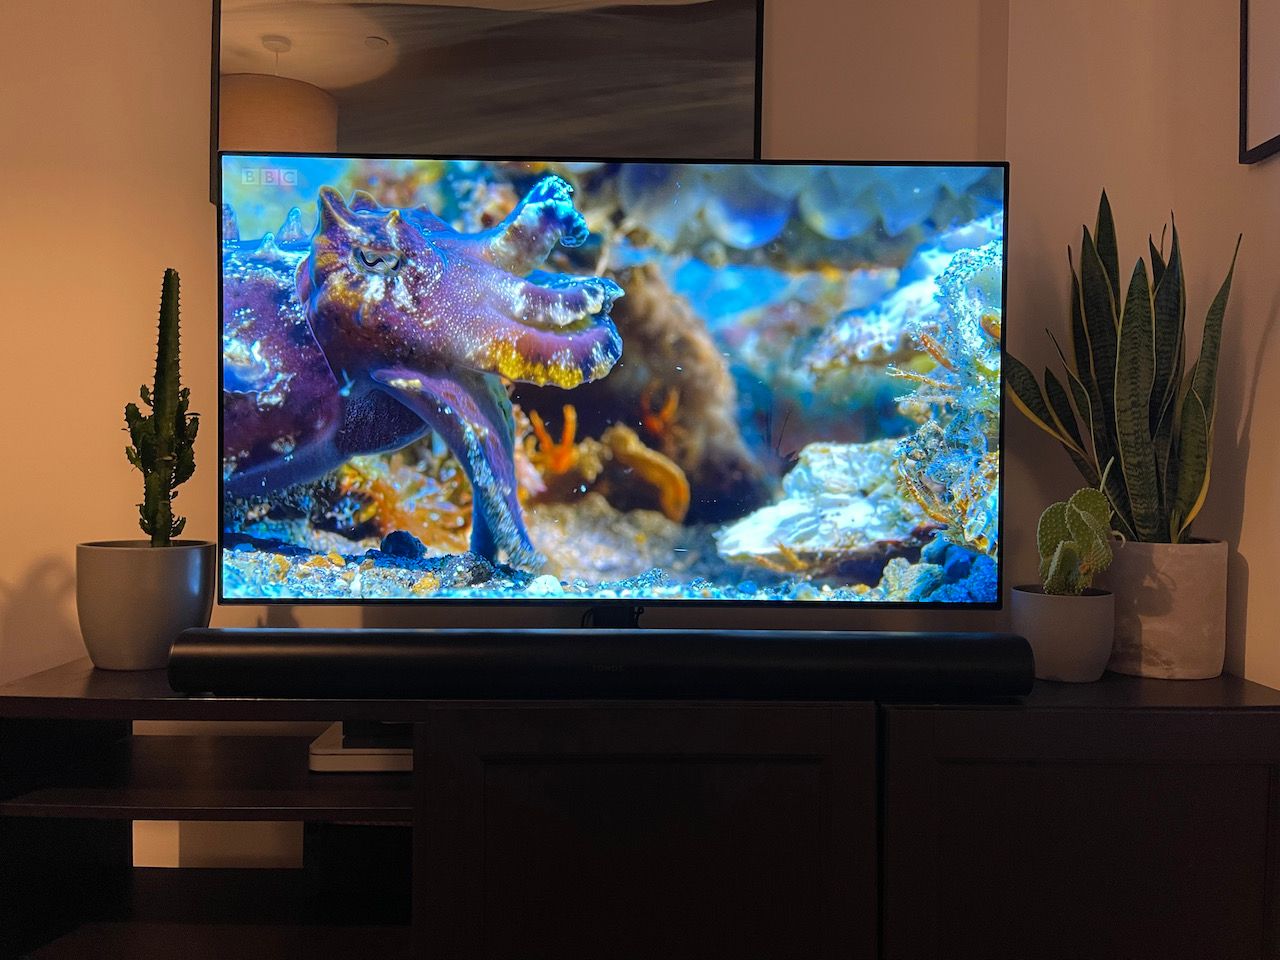 Photo of TV setup with LG CX and Sonos Arc soundbar, demonstrating a gap between the bottom of the TV and top of the soundbar when viewing from an upright seated position.